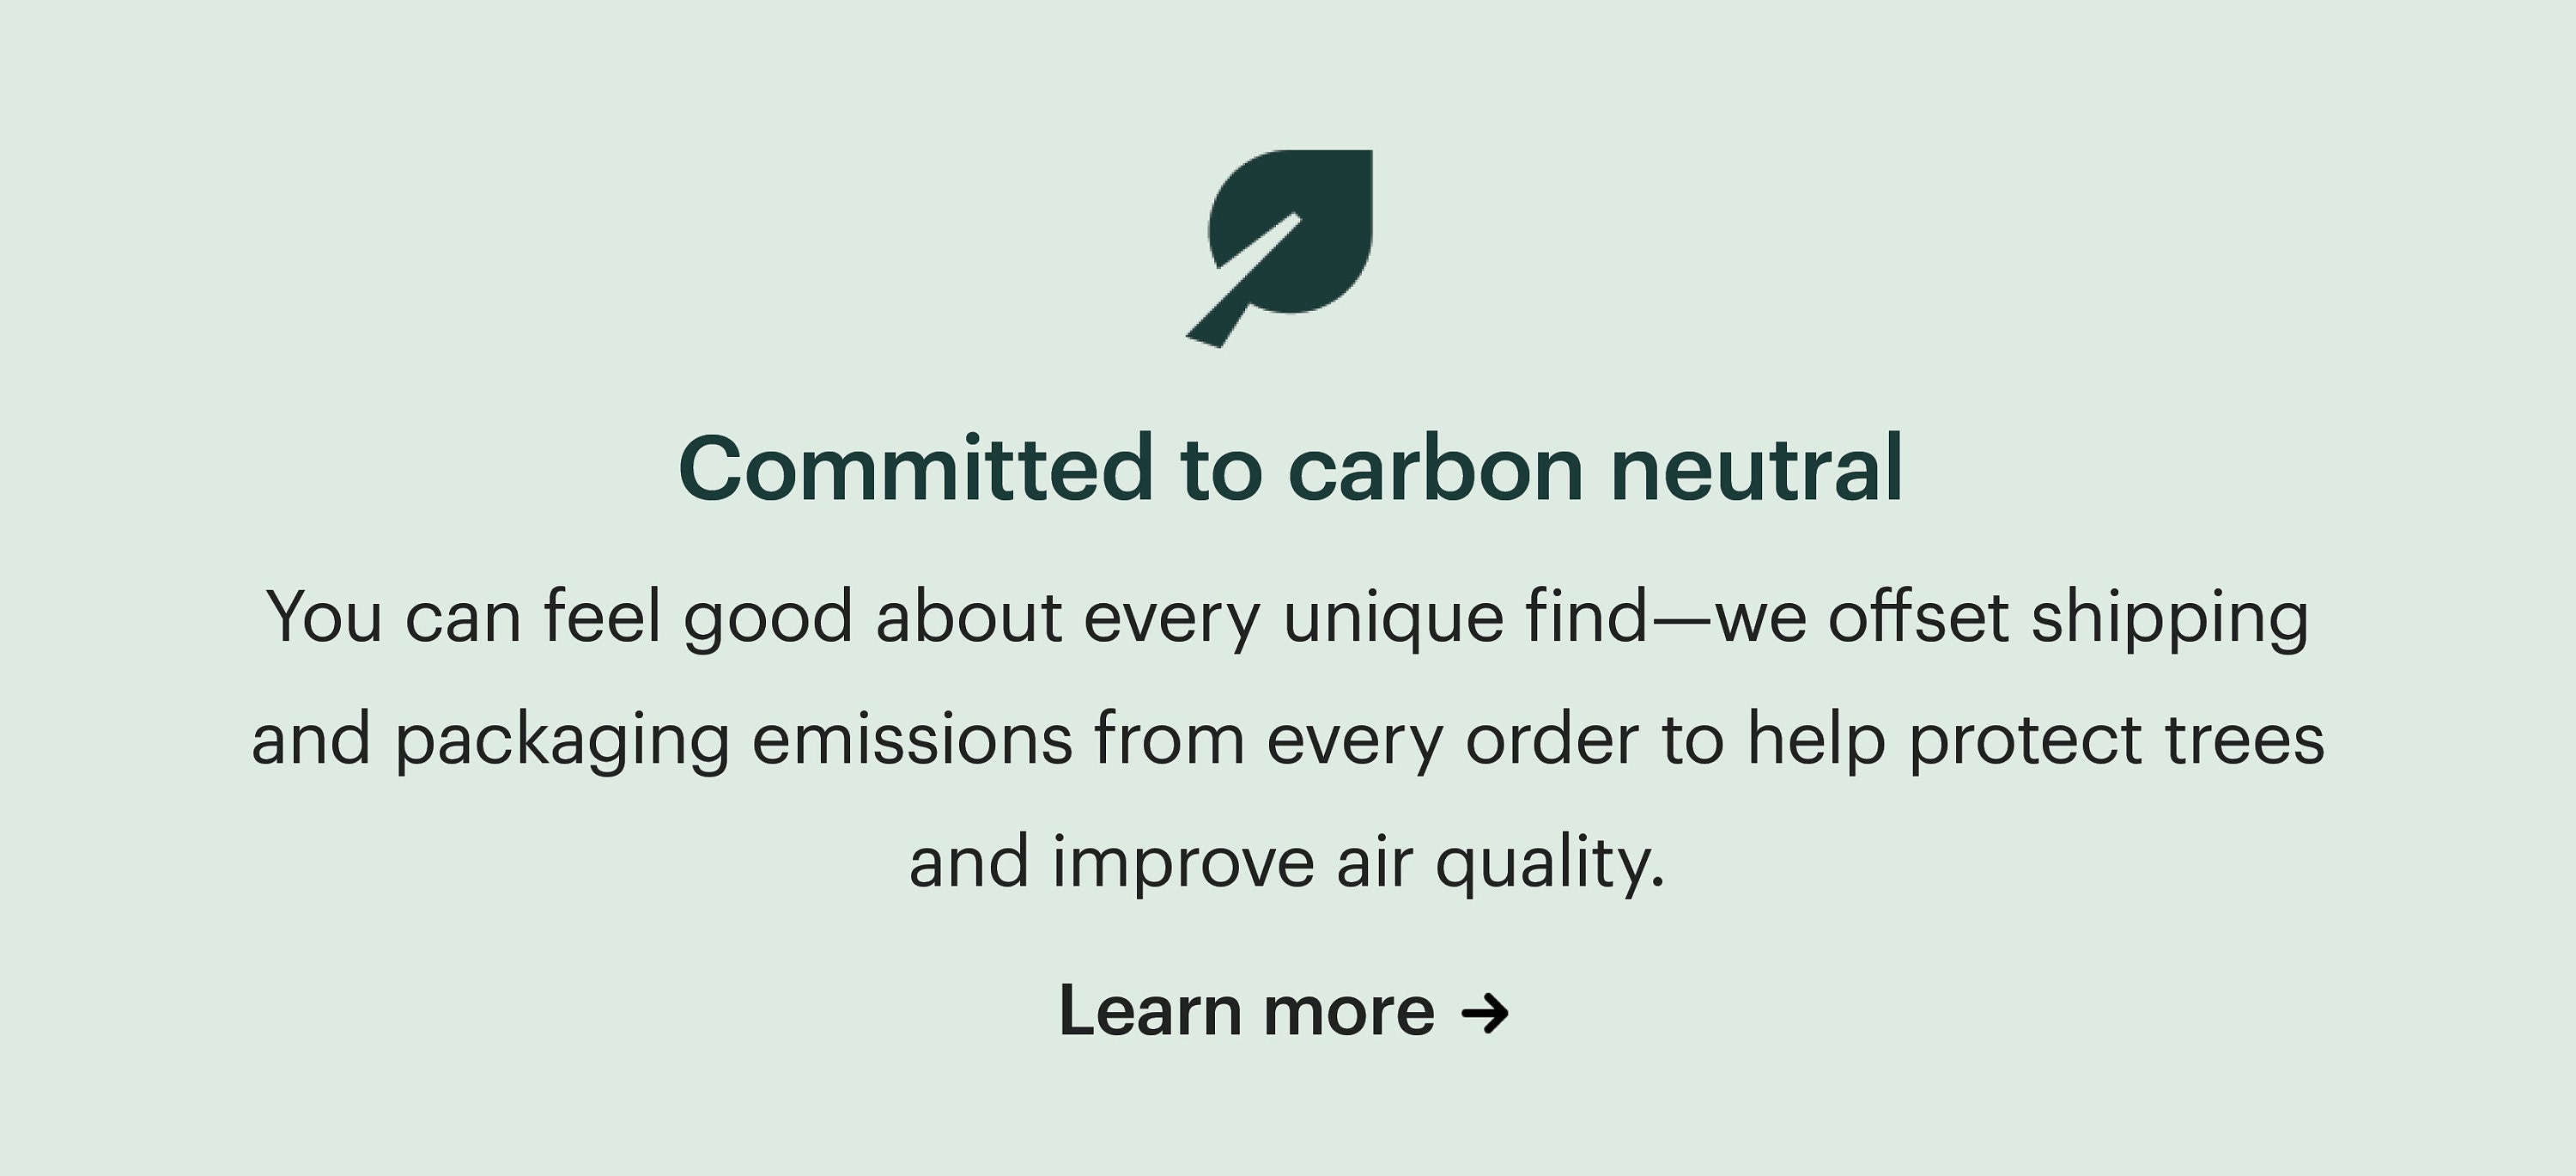 A banner reminding shoppers that Etsy is committed to carbon neutral.